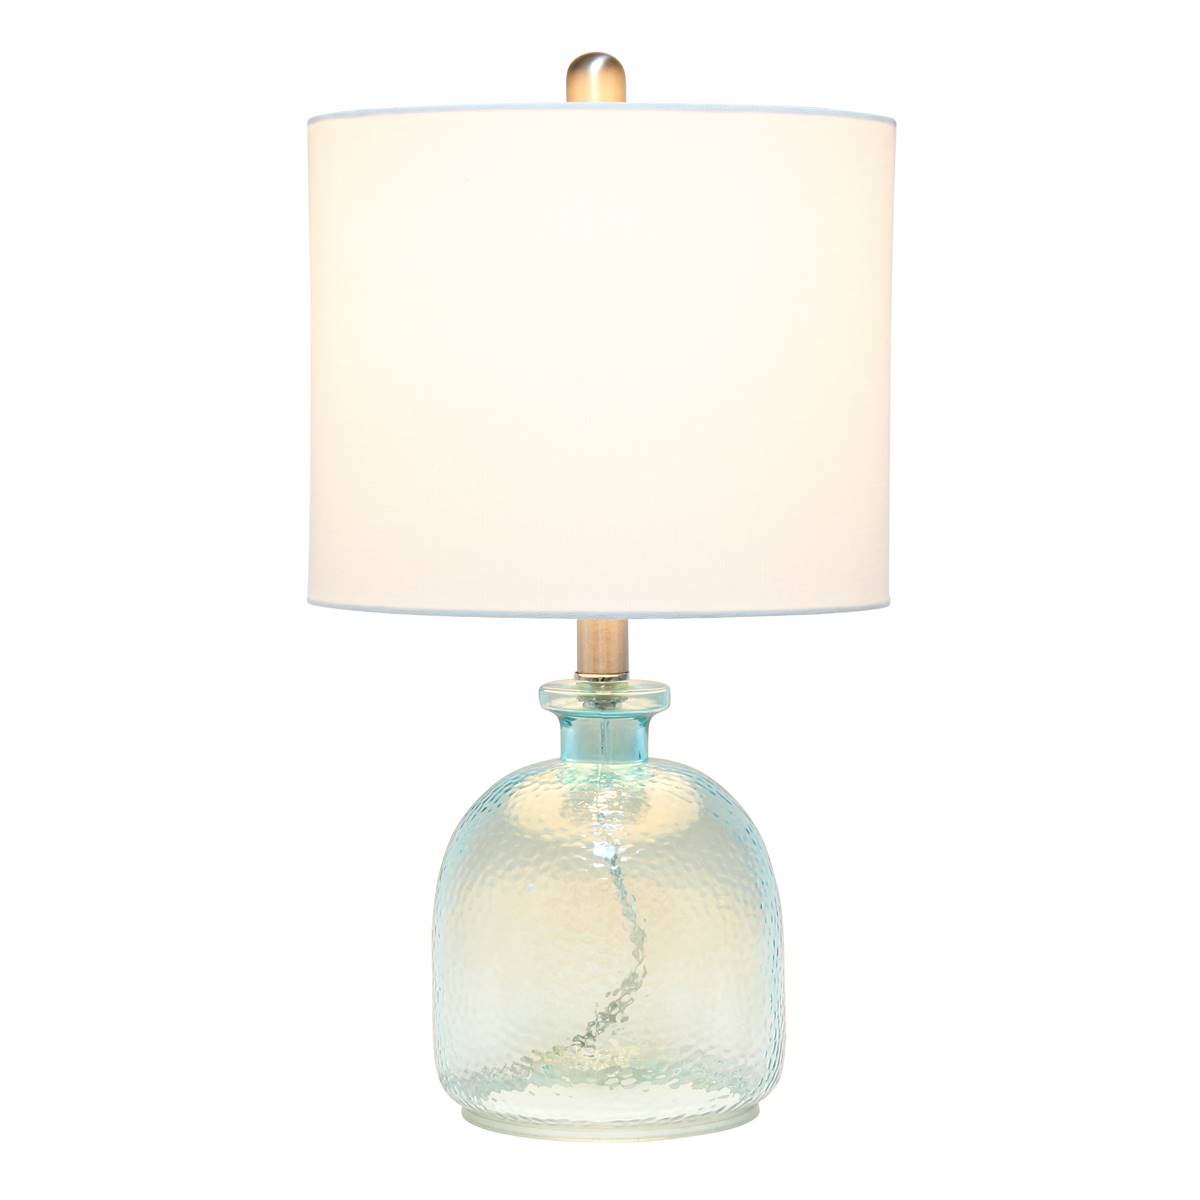 Lalia Home Classix Hammered Glass Jar Table Lamp W/Linen Shade